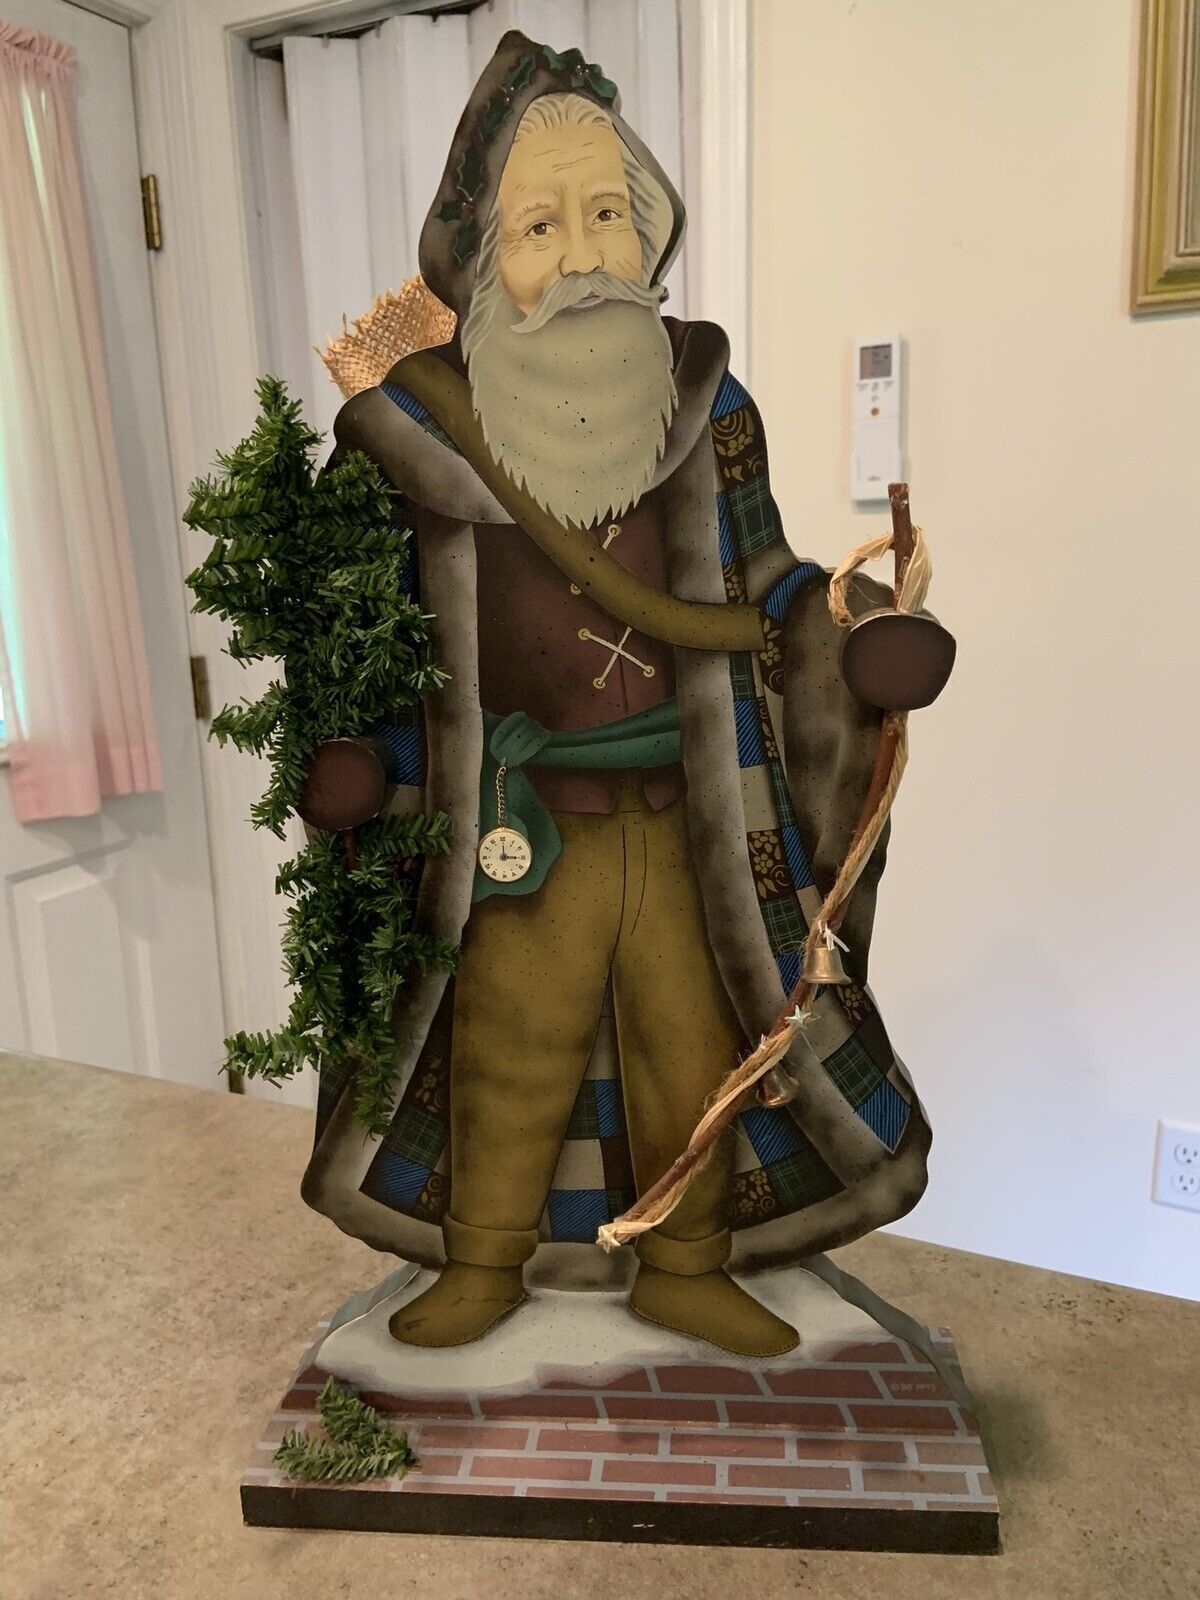 Old World Father Christmas Wooden Santa Claus 21”